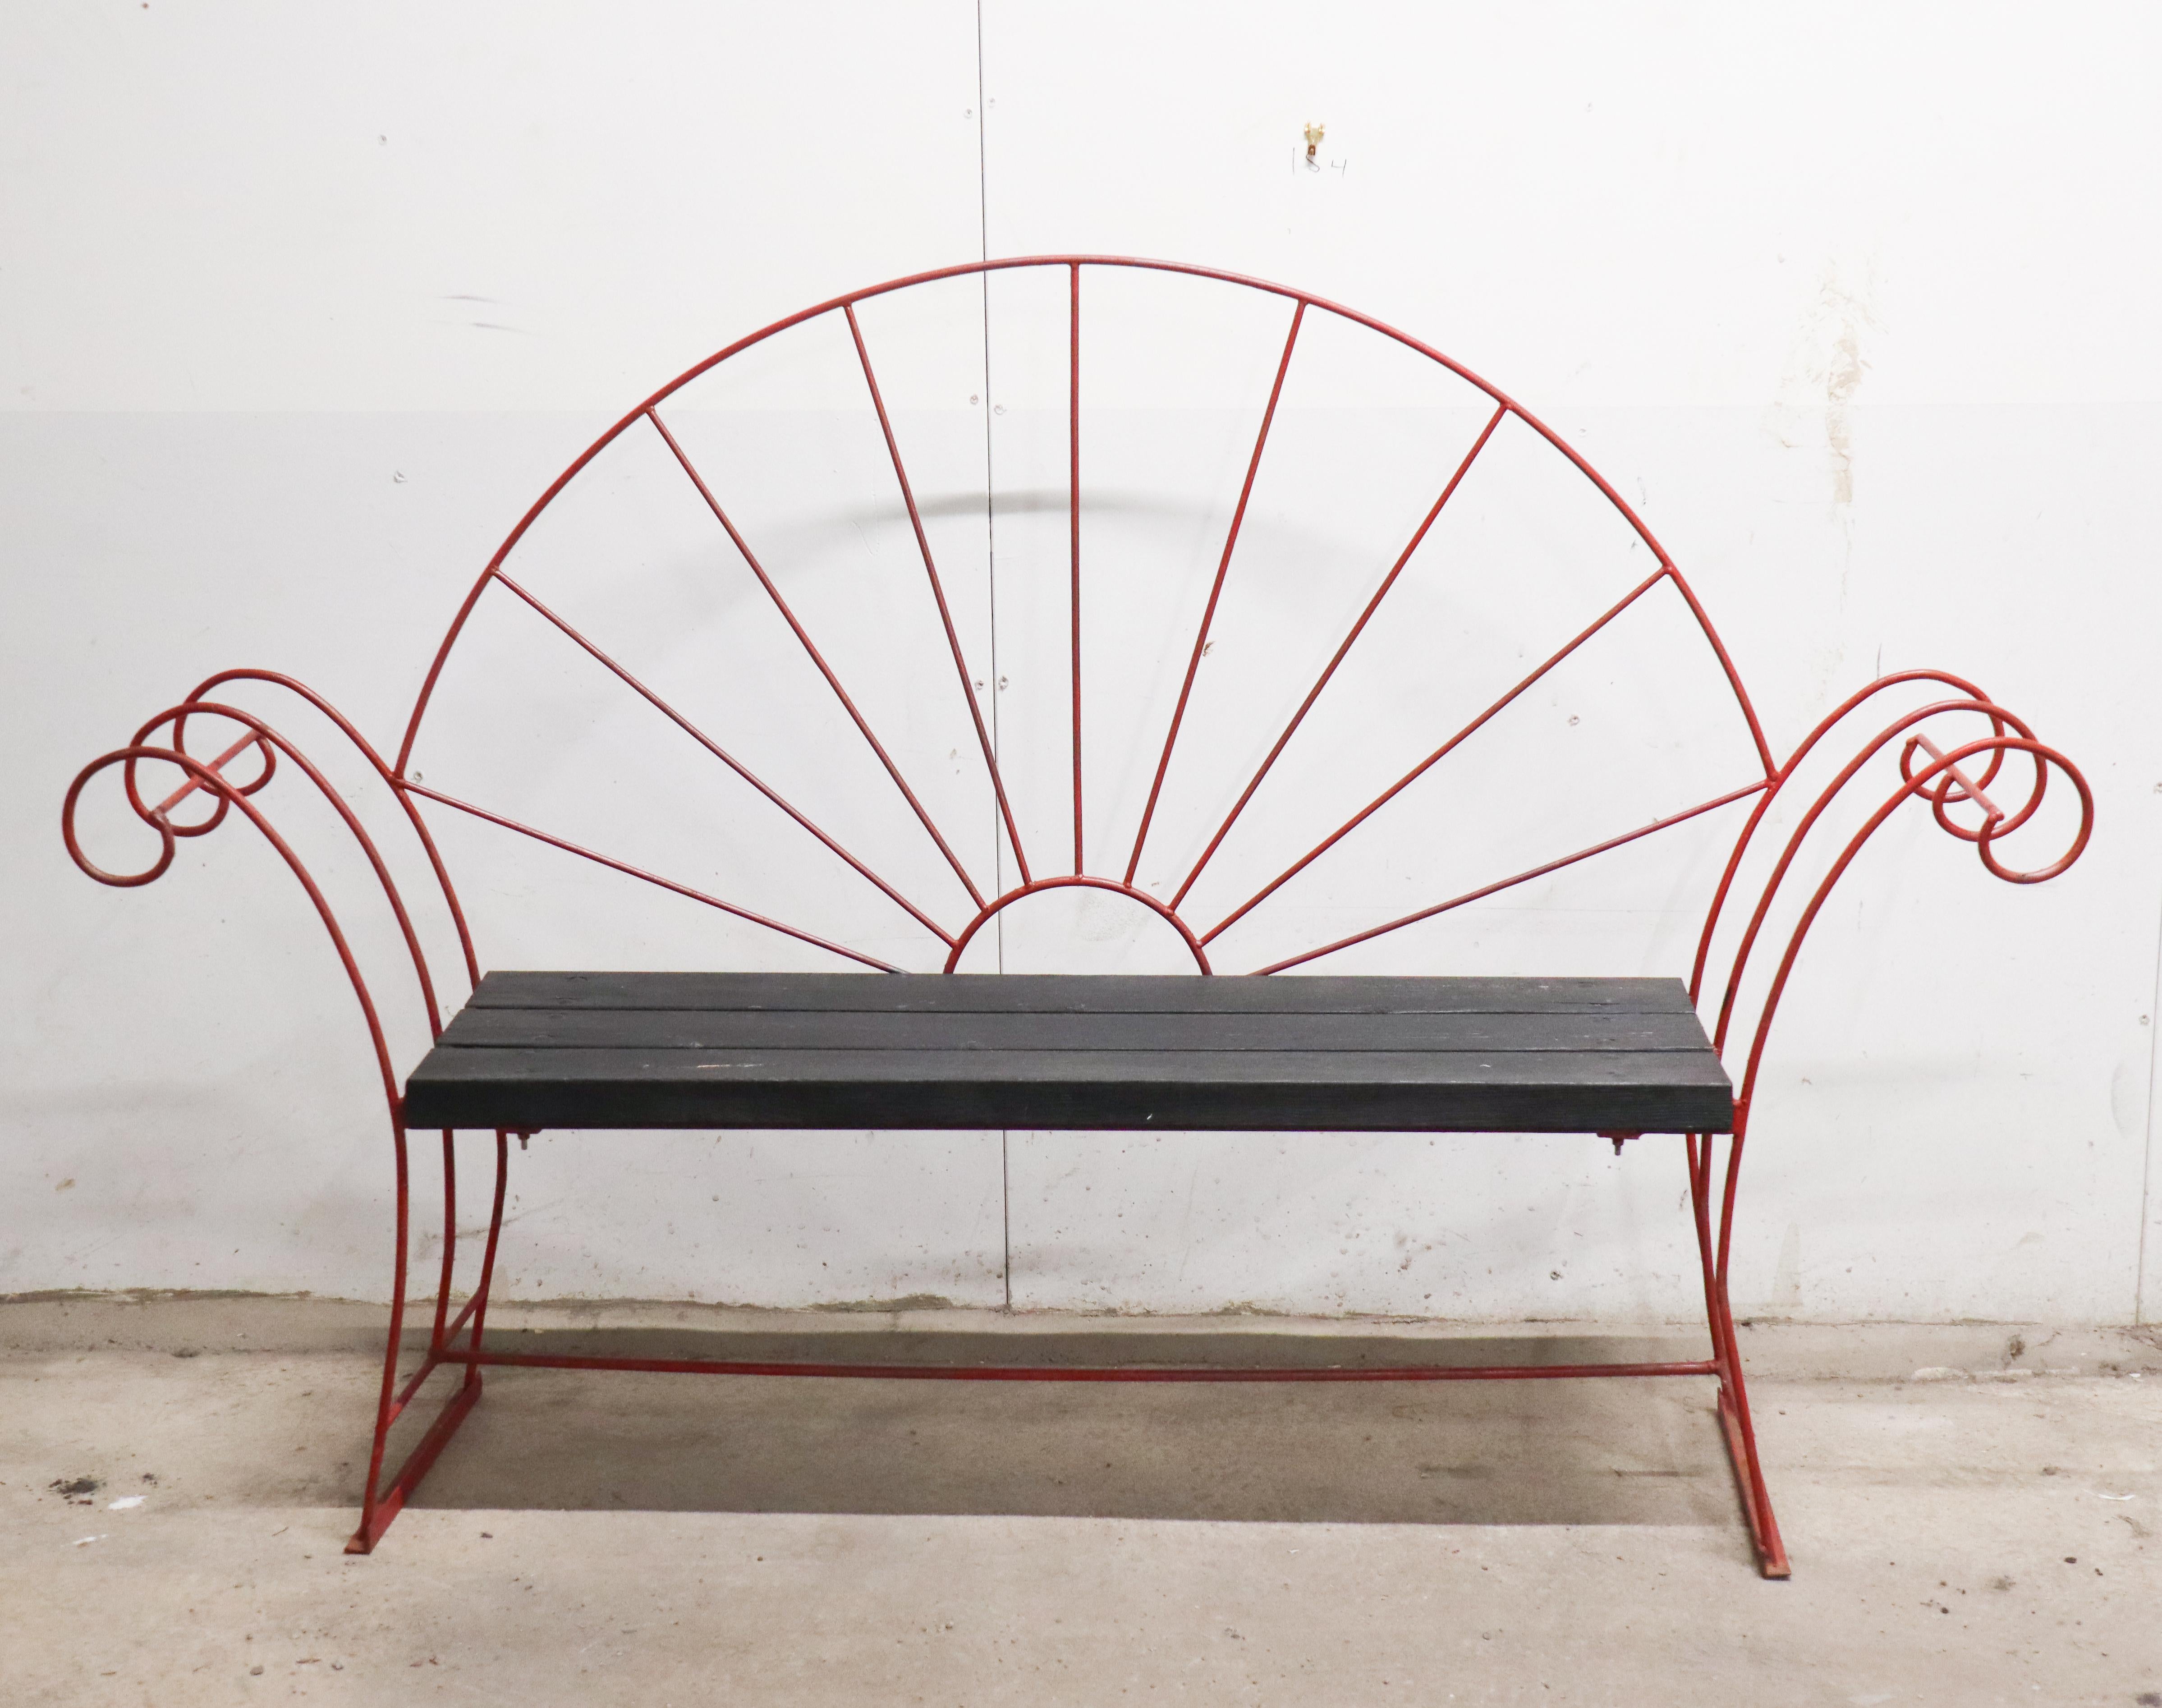 A stunning garden sofa probably design in Sweden in the early 20th century. The sofa is made of wrought iron and wood. It is a really unique design and I have never seen anything like this before. The sofa is painted red, I´m not sure if that is the